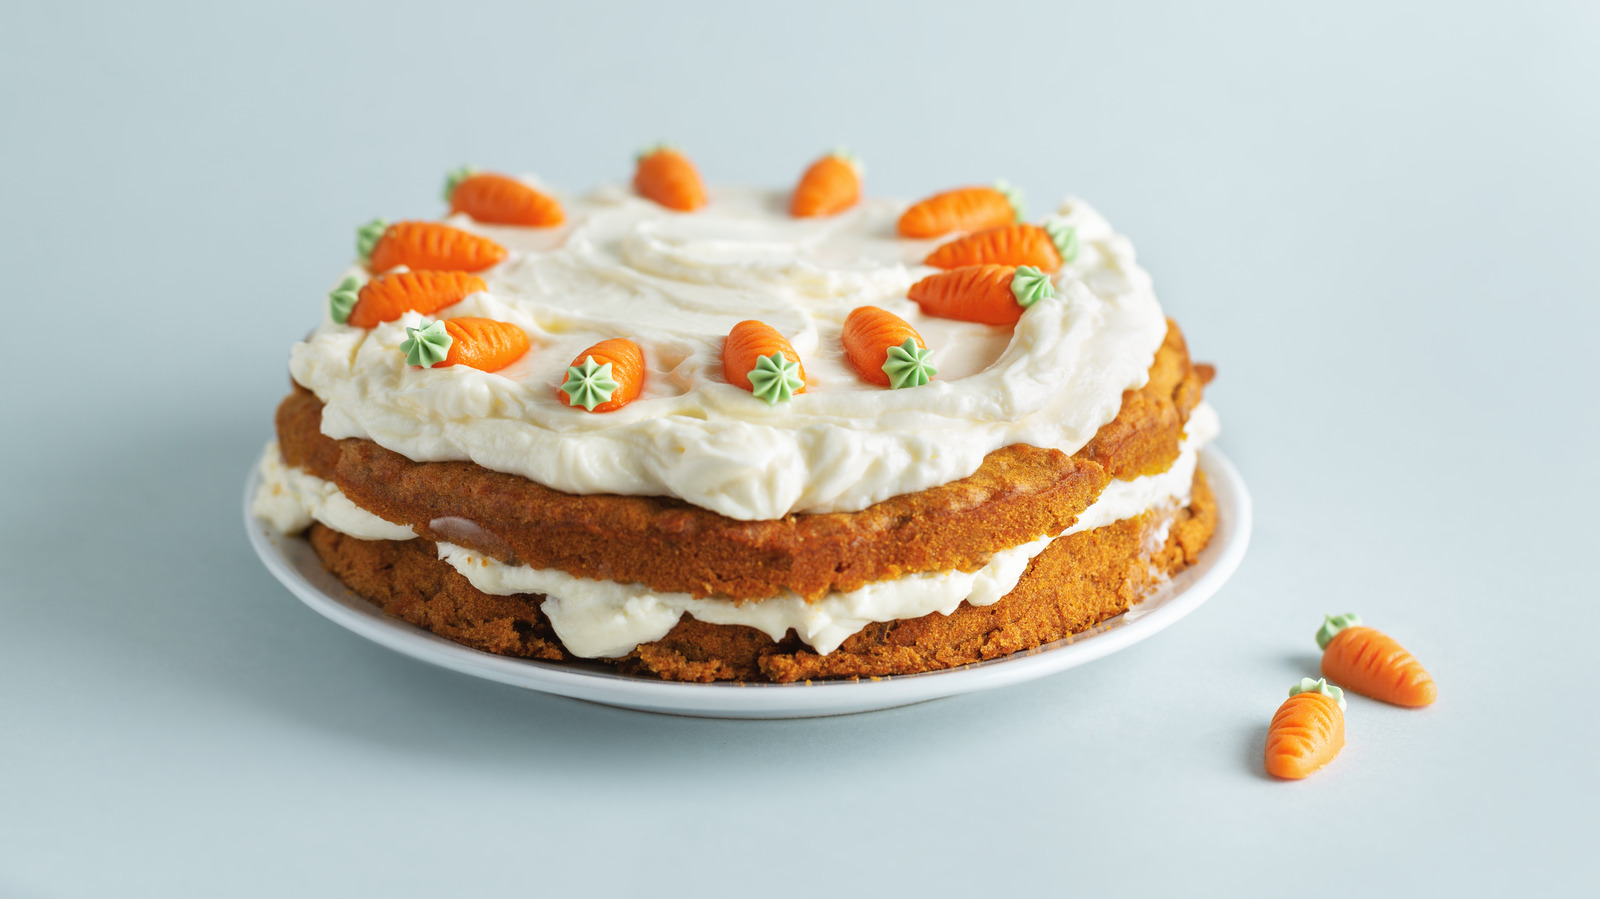 https://www.mashed.com/img/gallery/the-unusual-ingredient-you-should-add-to-your-pineapple-carrot-cake/l-intro-1662993747.jpg